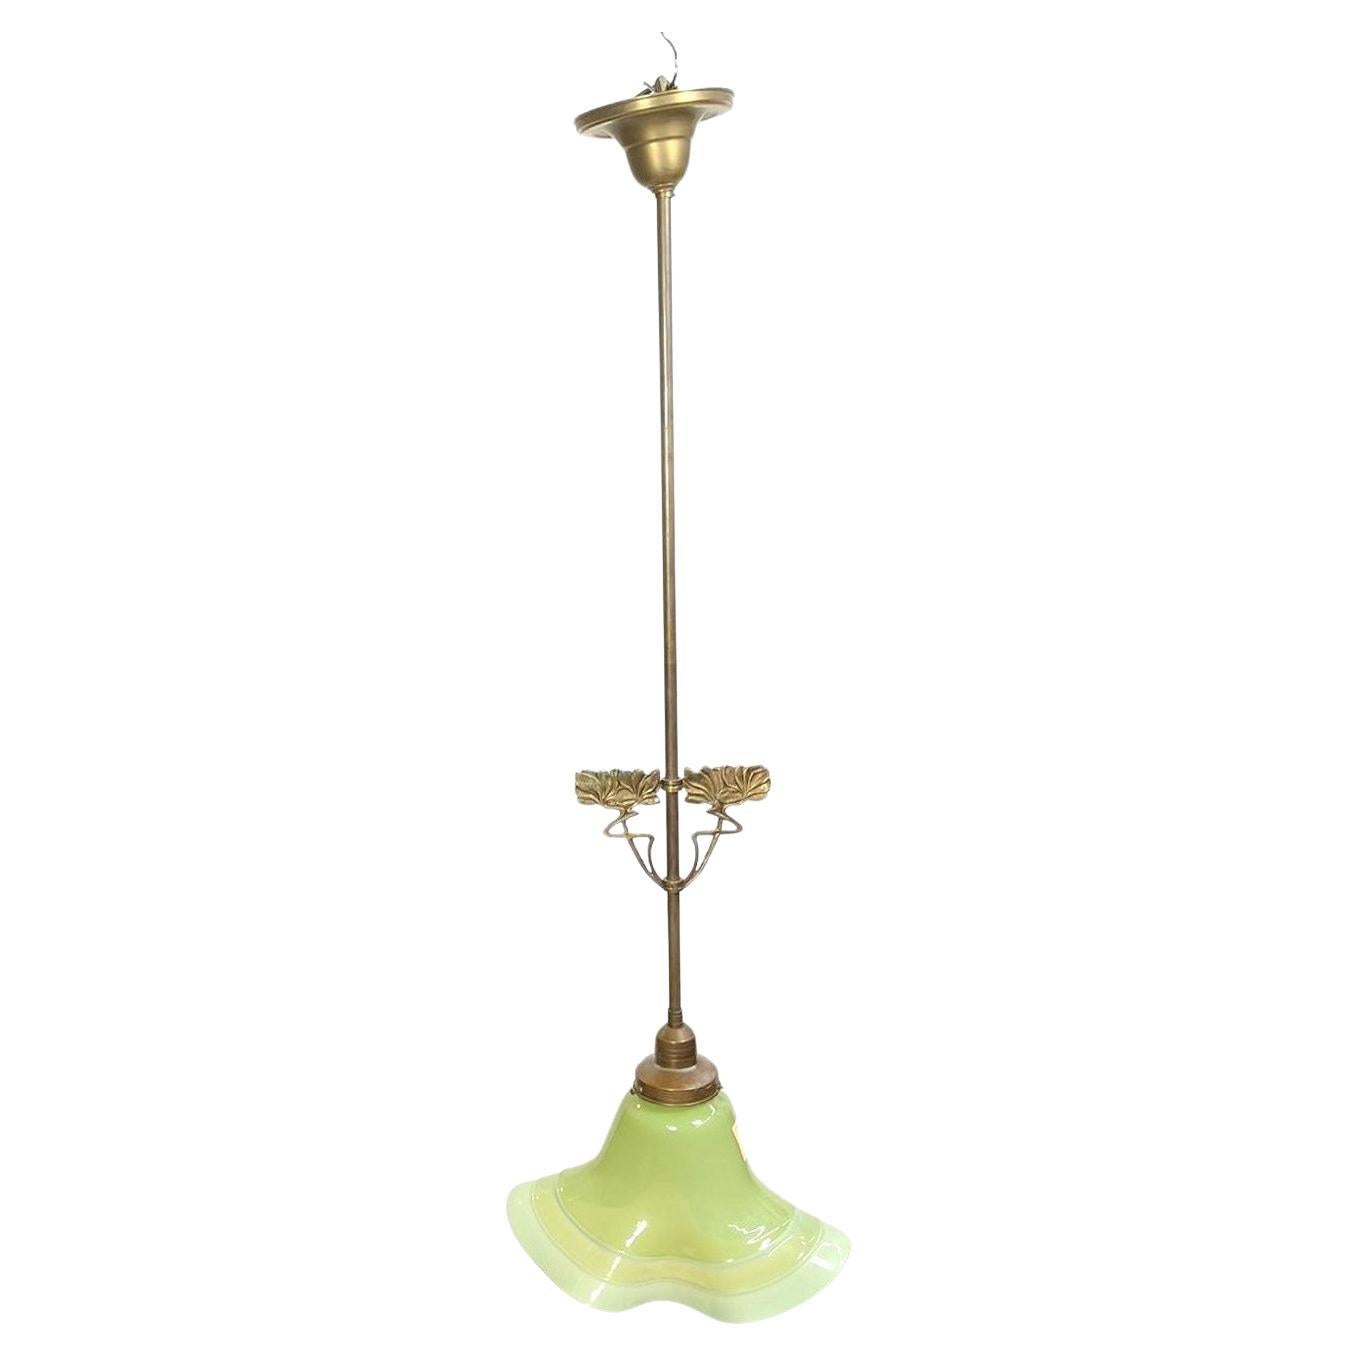 Art Nouveau lamp pendant with a green glass shade by Márton Horváth For Sale